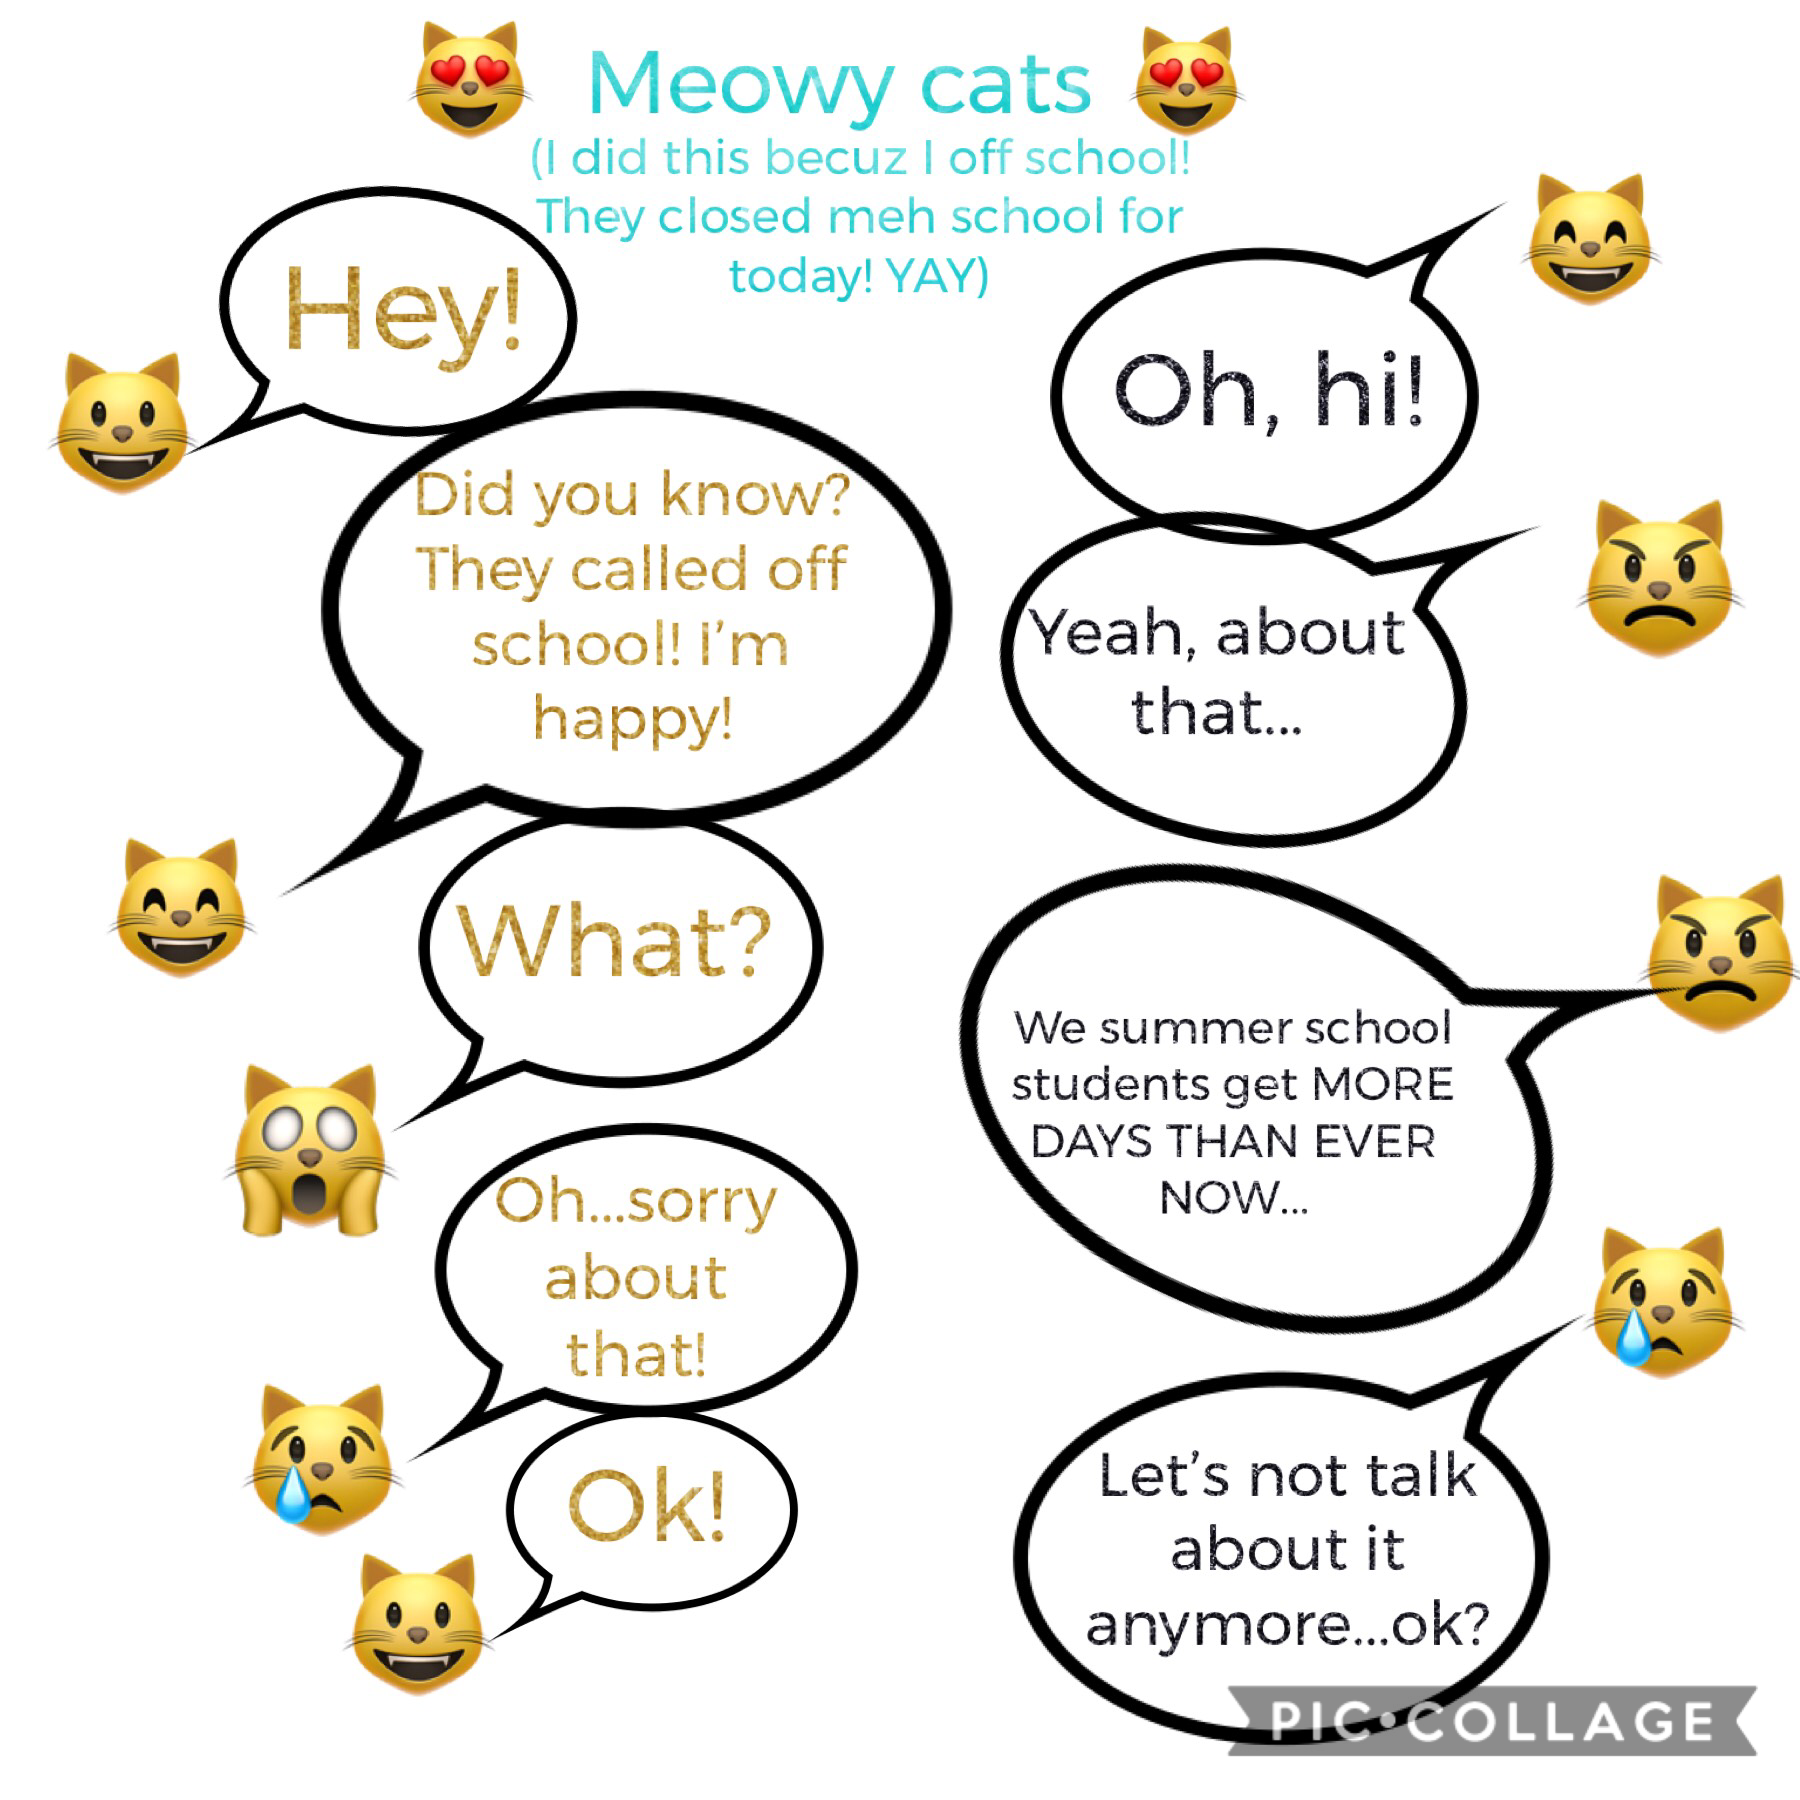 😻 Meowy cats 😻